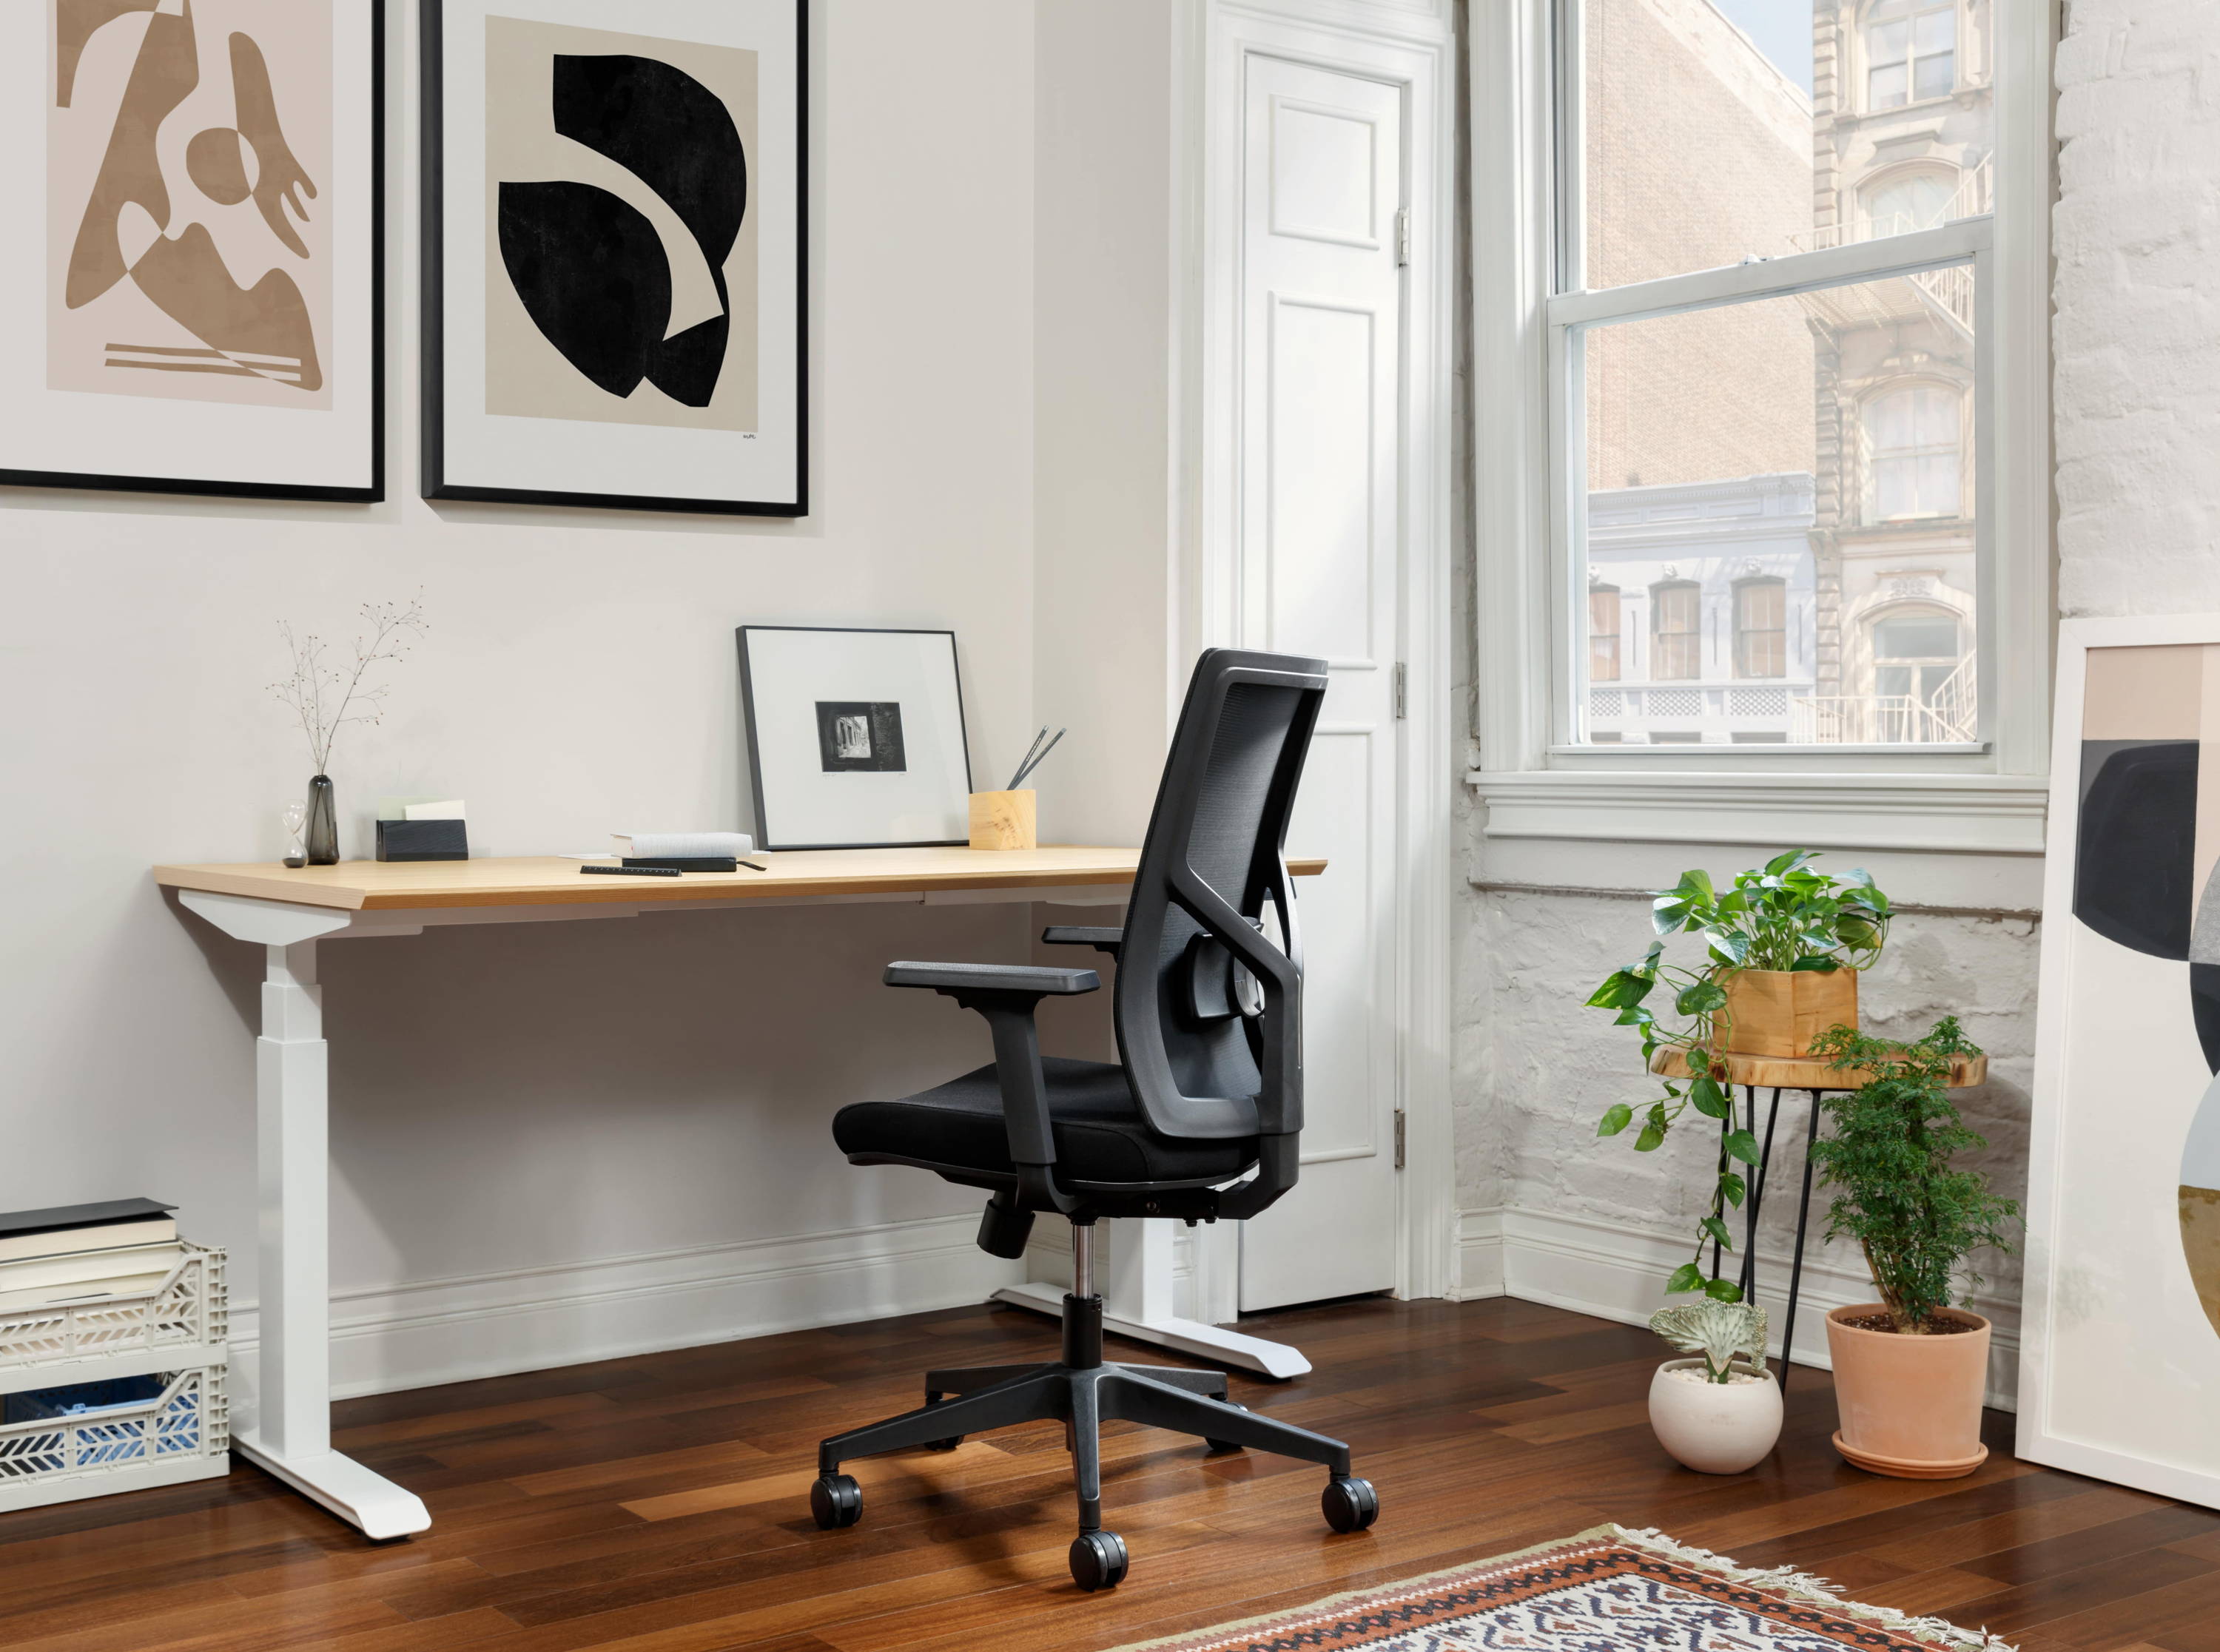 Shop the 11 Home Office Must-Haves for Picking up Your Productivity